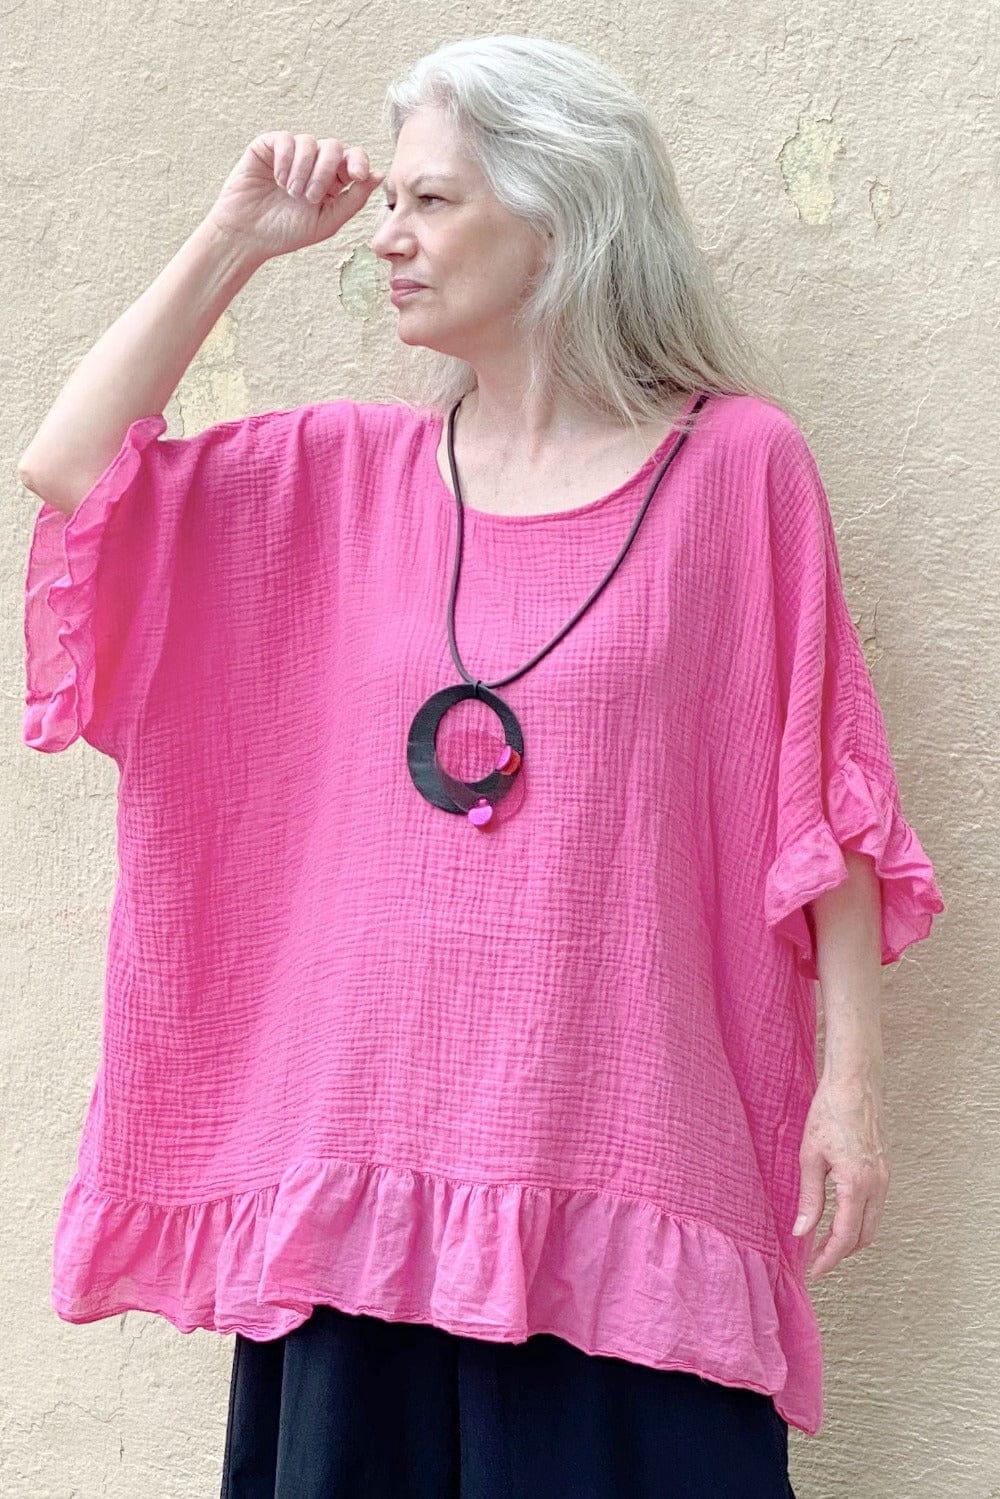 Woman wearing a pink ruffled tunic with black full cut pants and a black & pink pendant